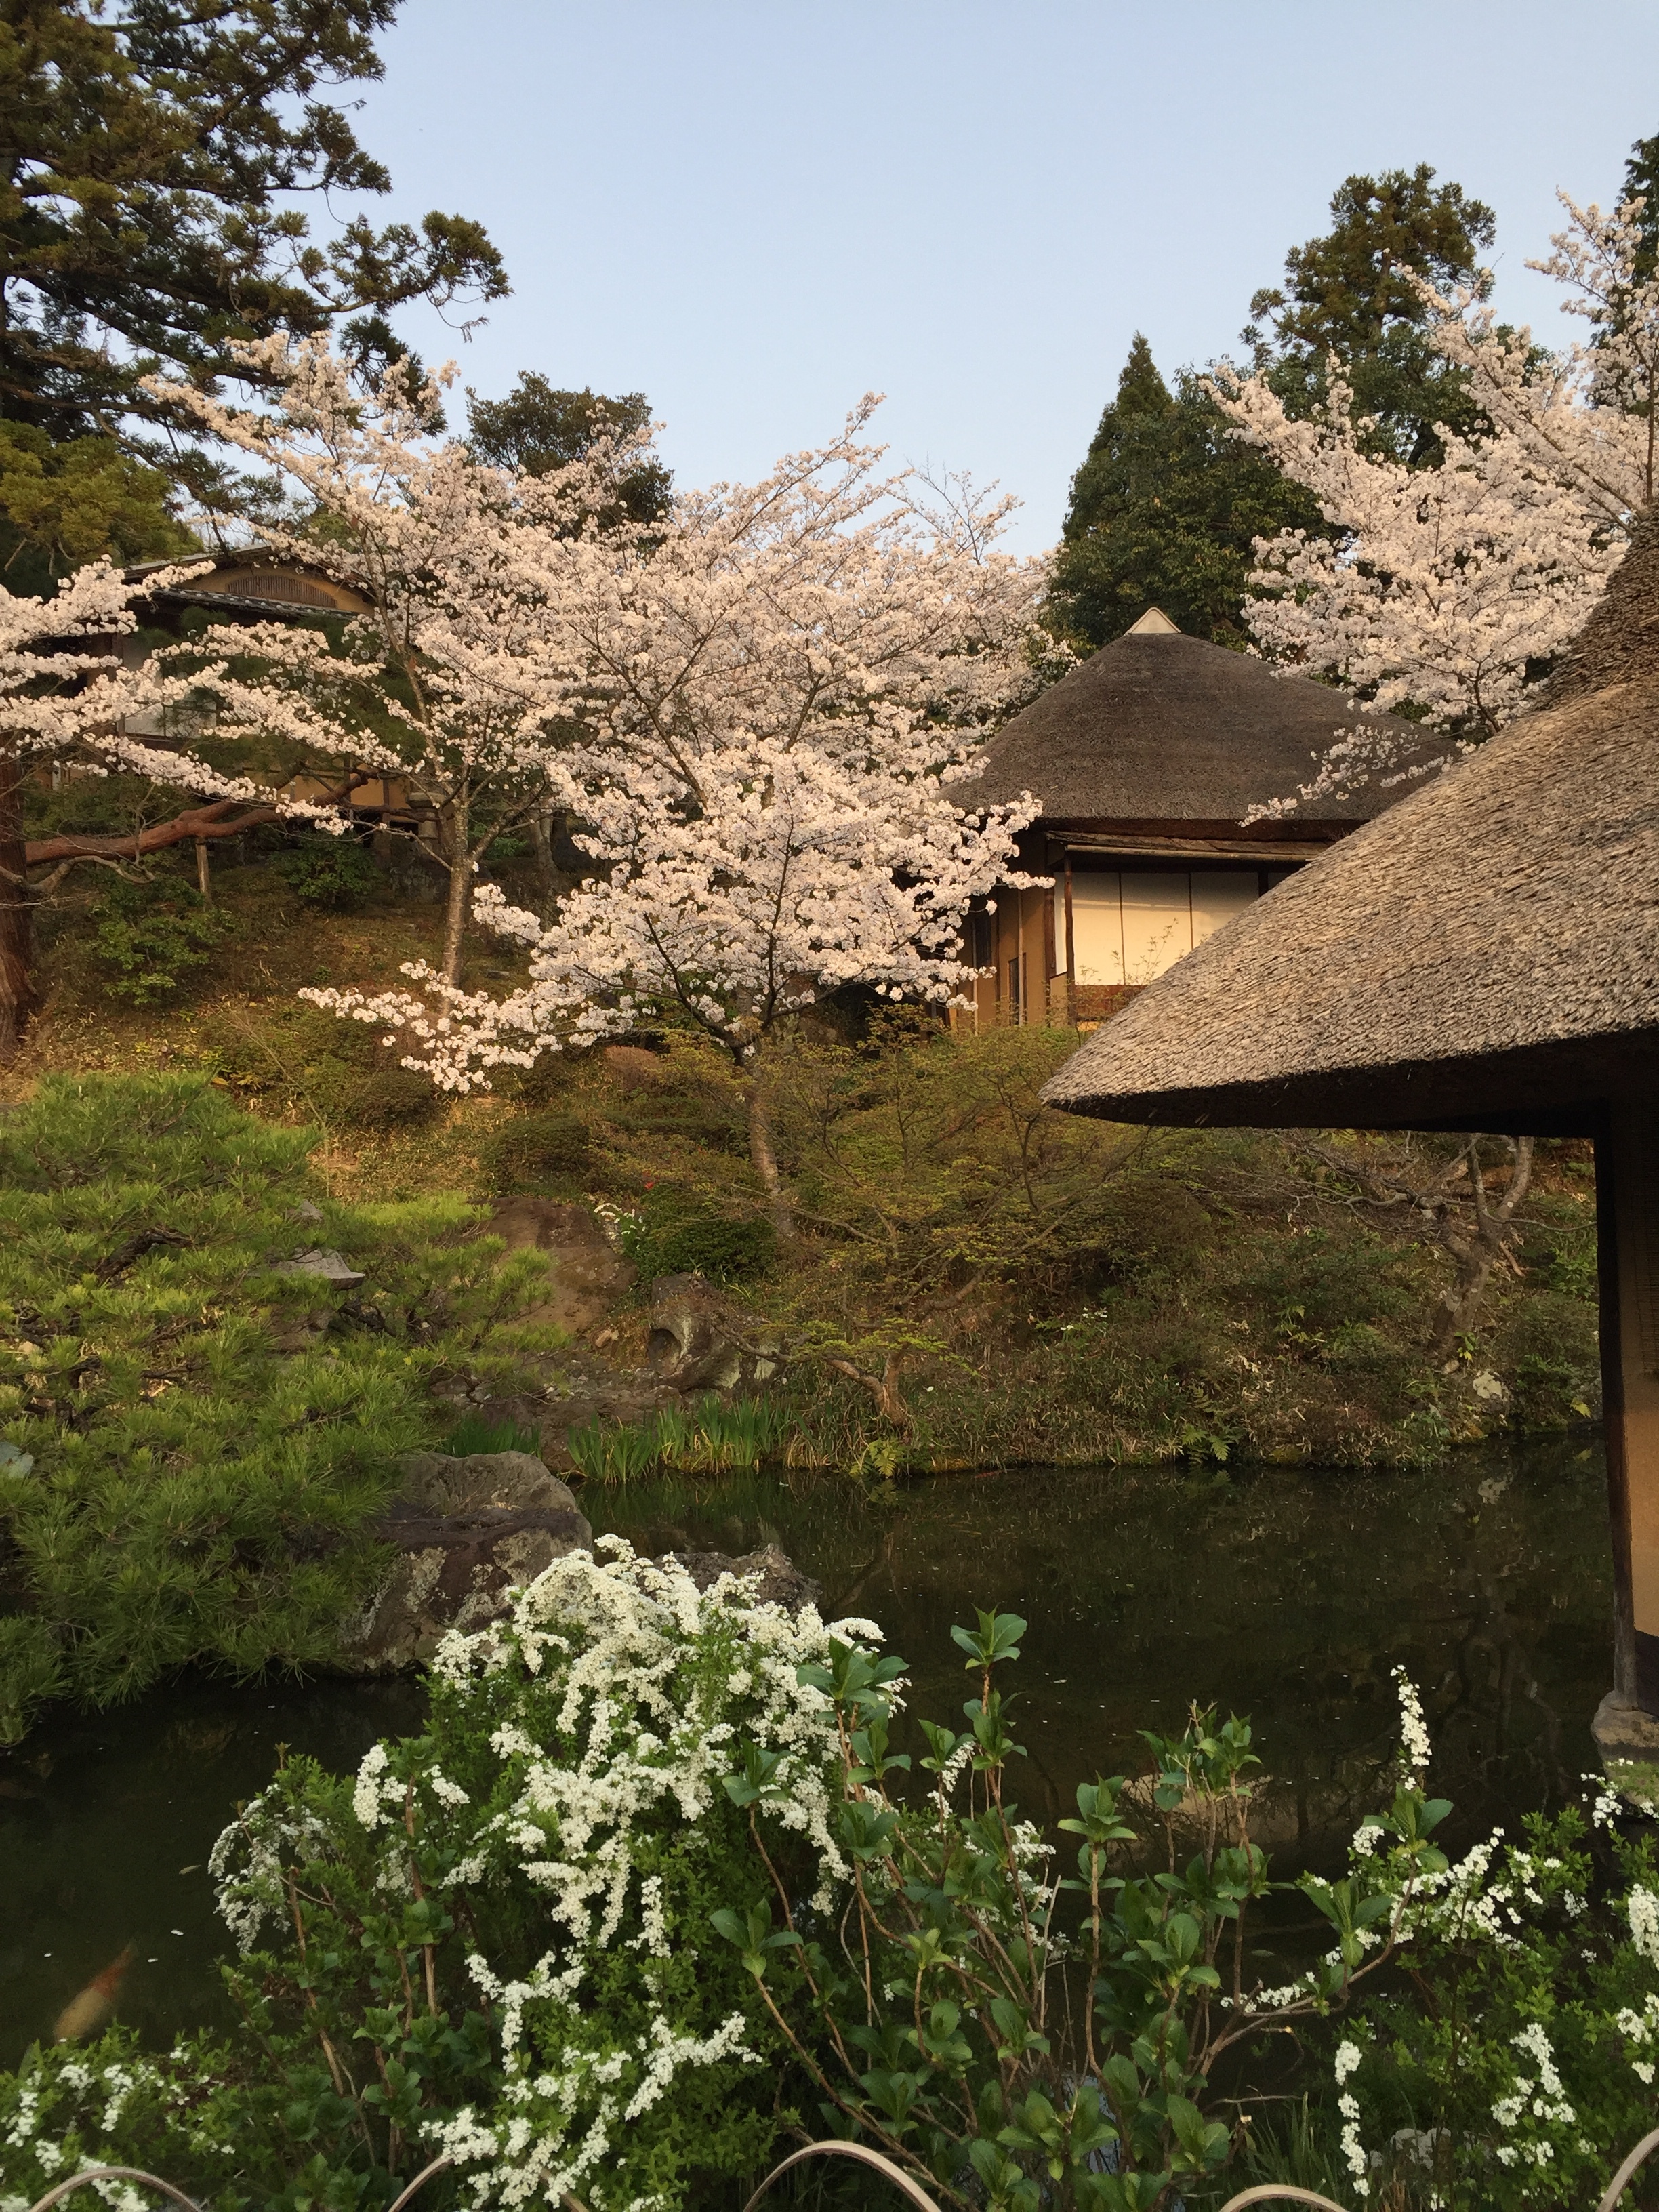 White cherry blossoms in Kyoto | EAT.PRAY.MOVE Yoga | Kyoto, Japan